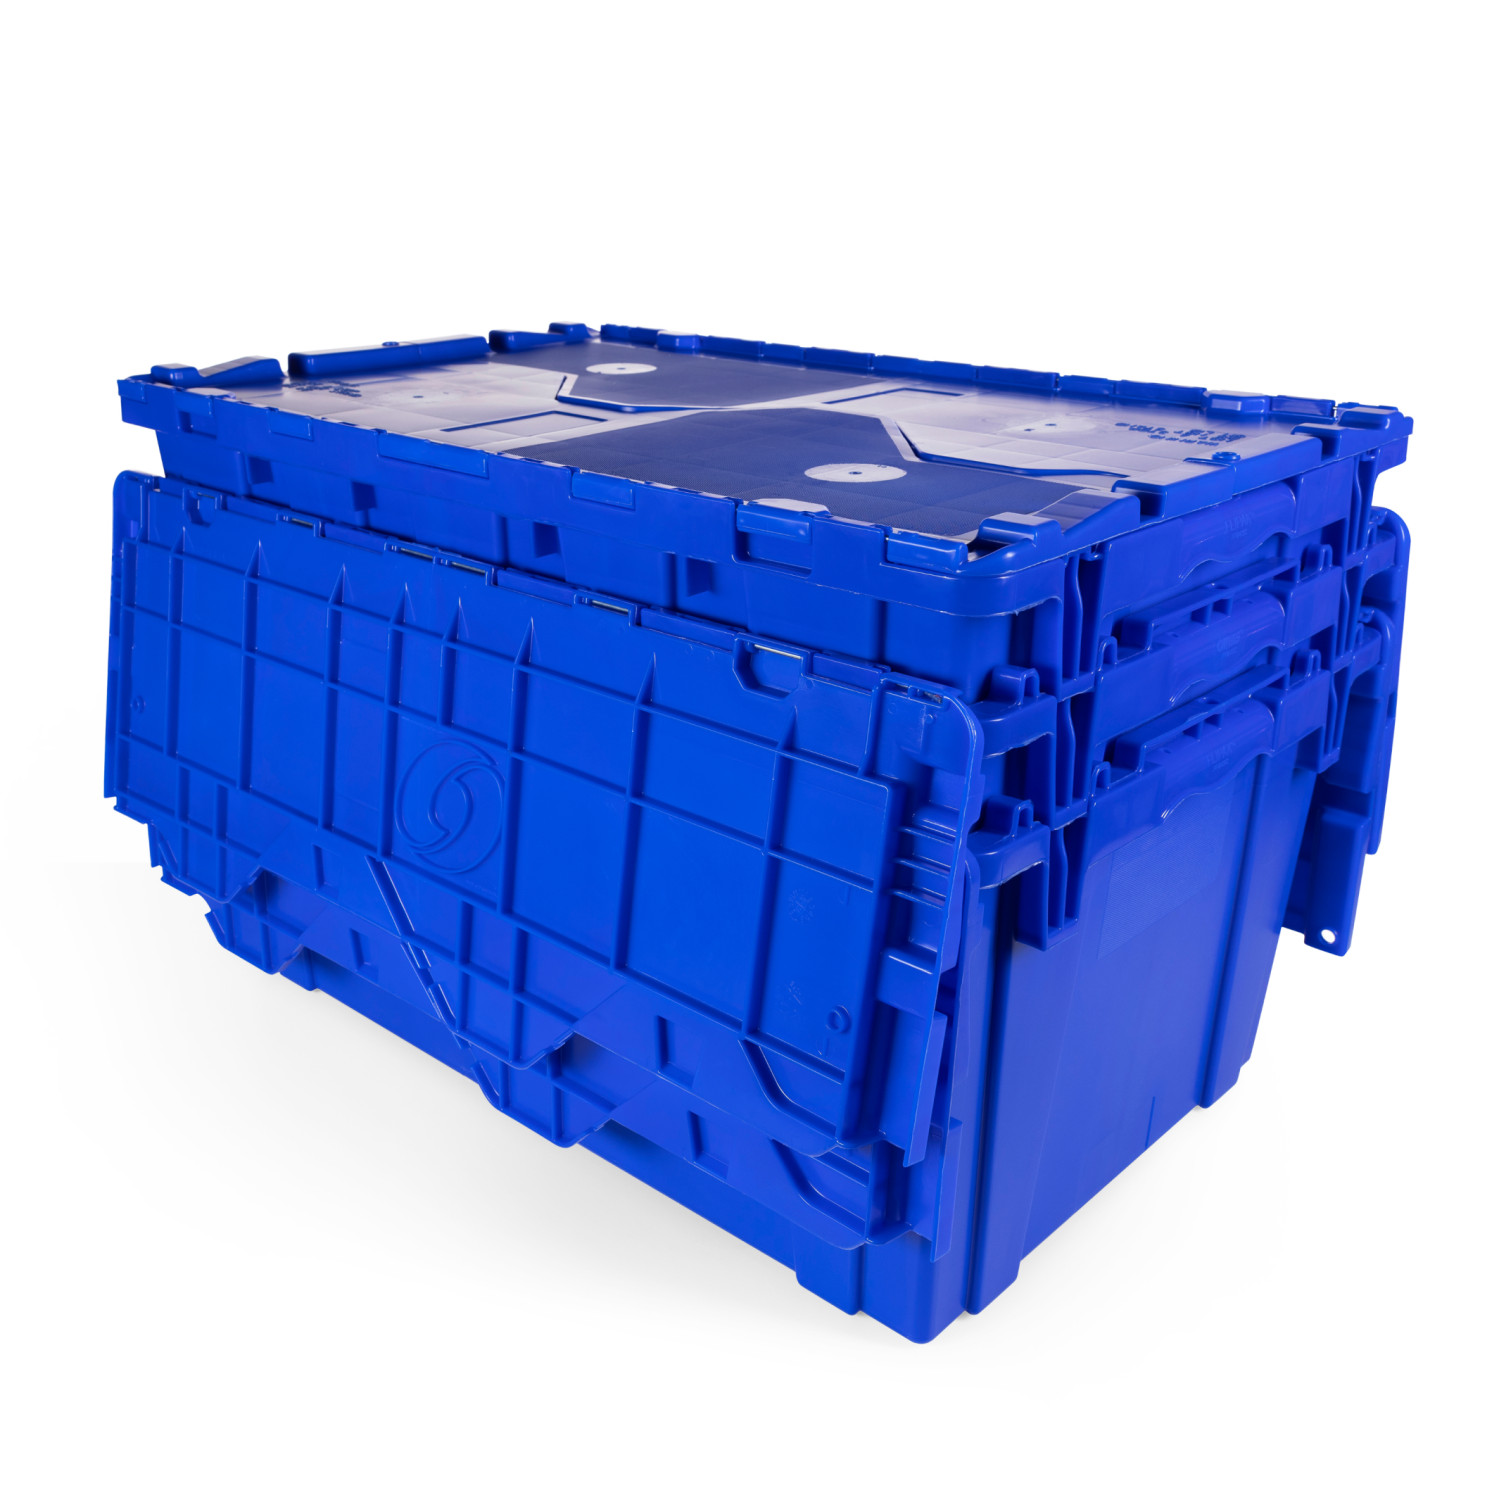 https://idlpack.com/image/cache/catalog/Products/Containers/2000x2000%20Blue%20Plastic%20Box%2026.9x16.9x12.1_white_bg%203-1500x1500.jpg